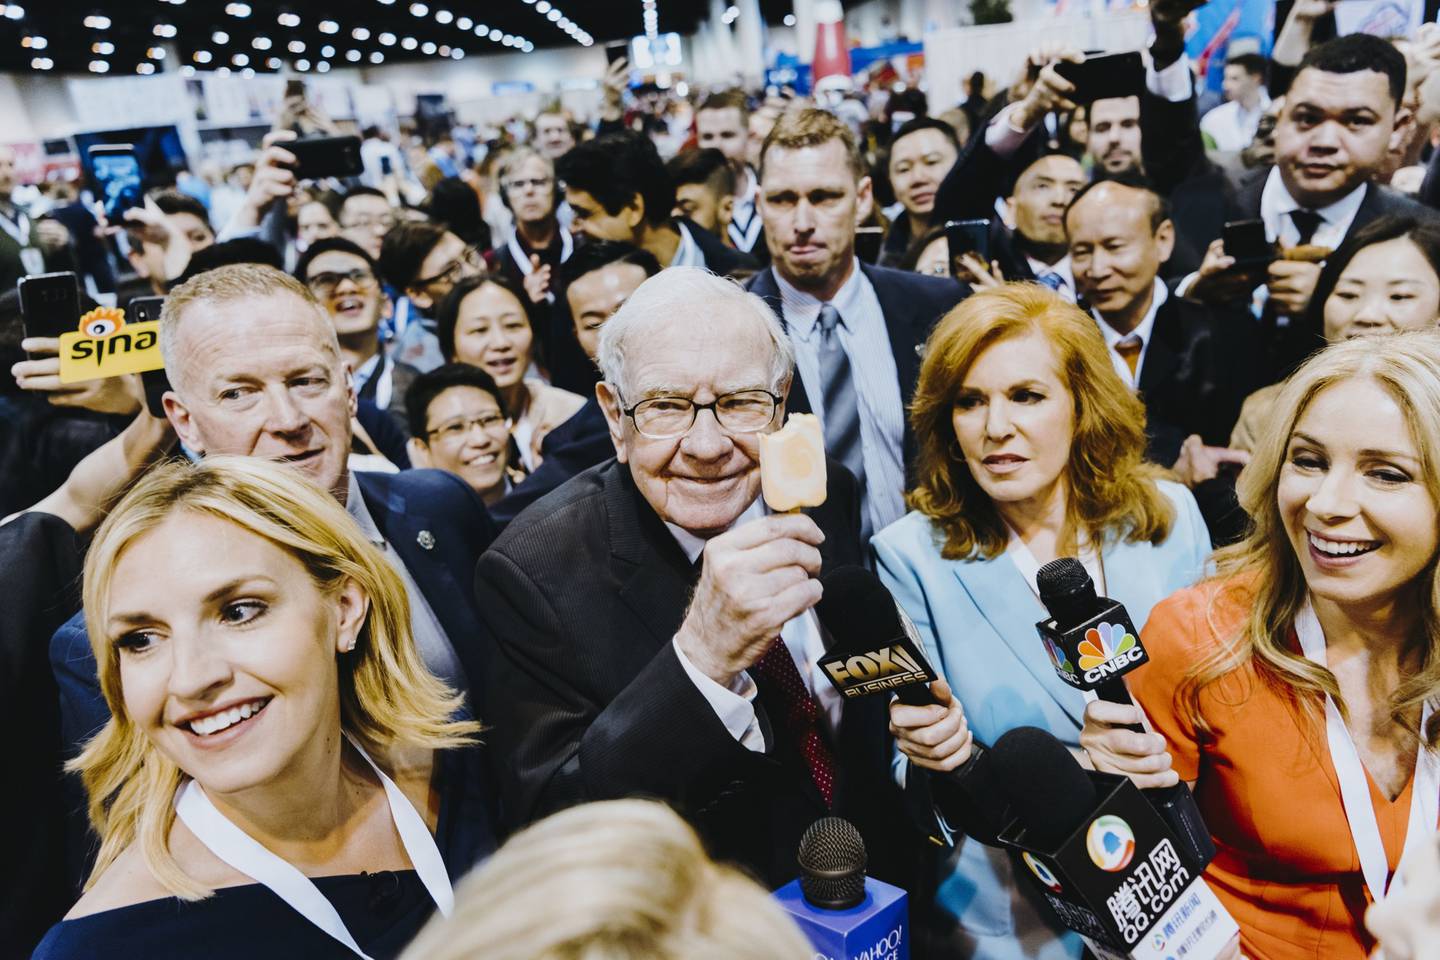 Warren Buffett, chairman and chief executive officer of Berkshire Hathaway Inc., center left, at the company's annual meeting in Omaha, Nebraska, U.S., on Saturday, May 4, 2019.